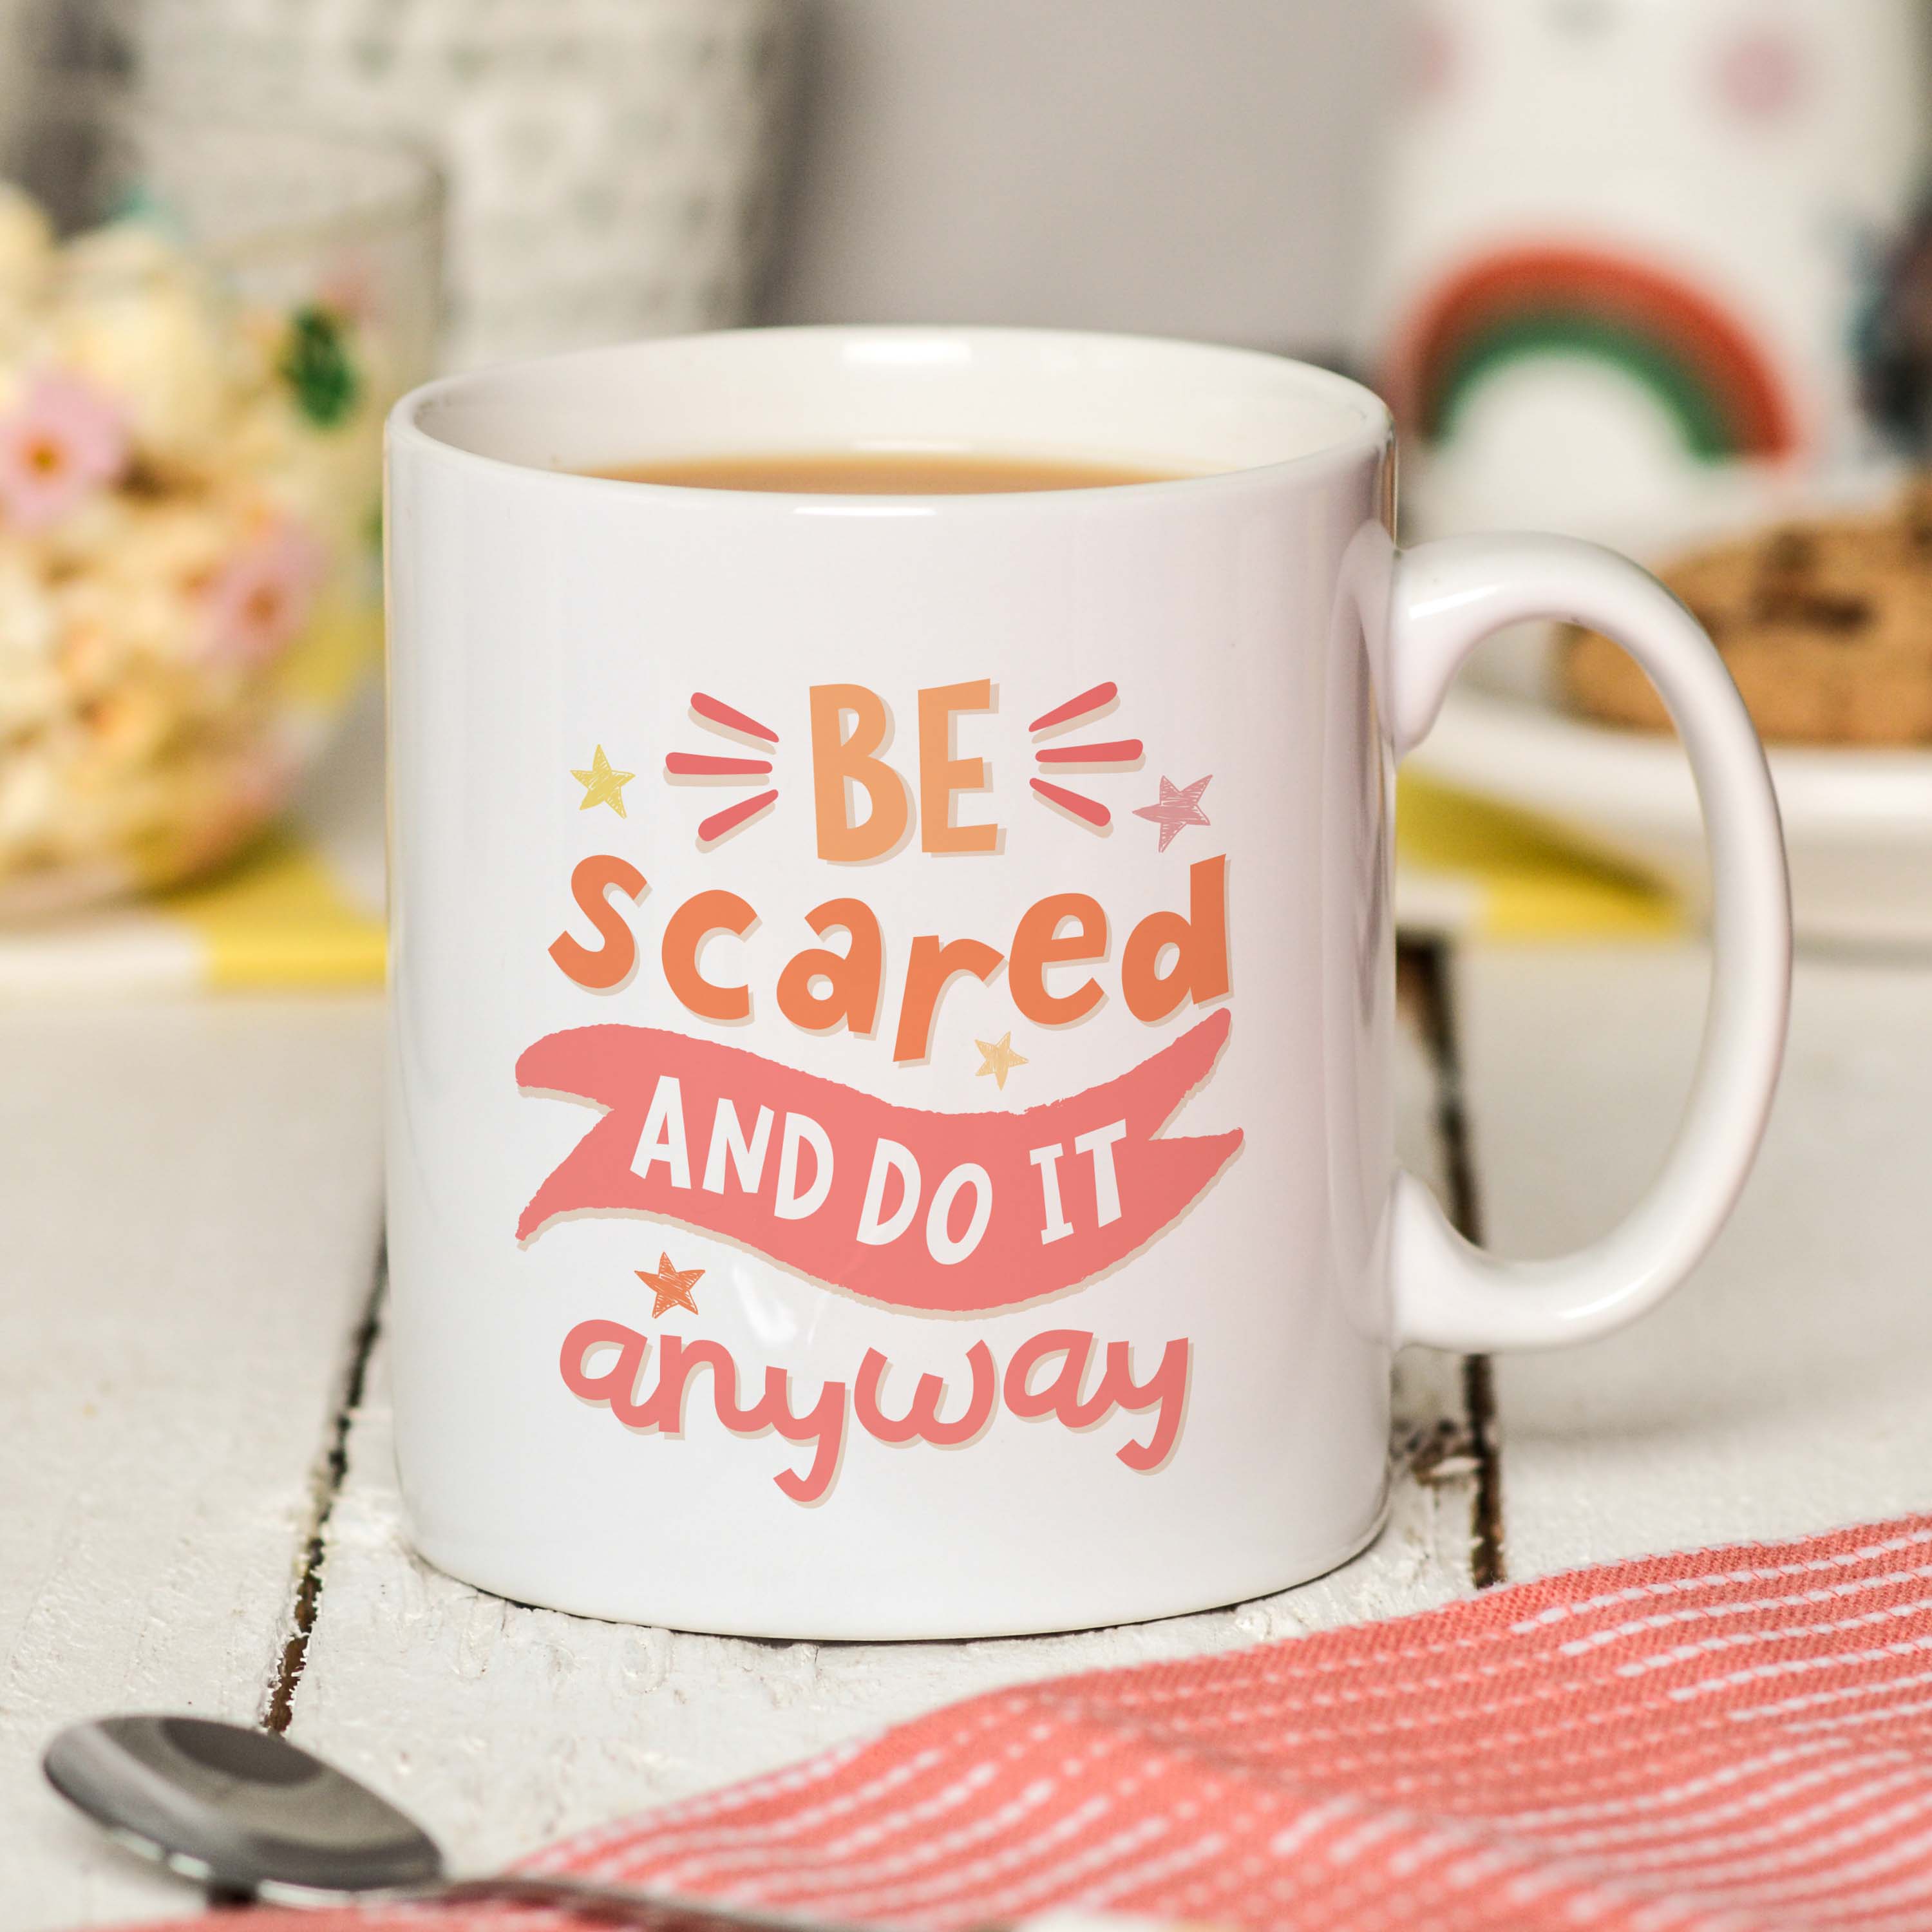 Be scared and do it anyway Mug